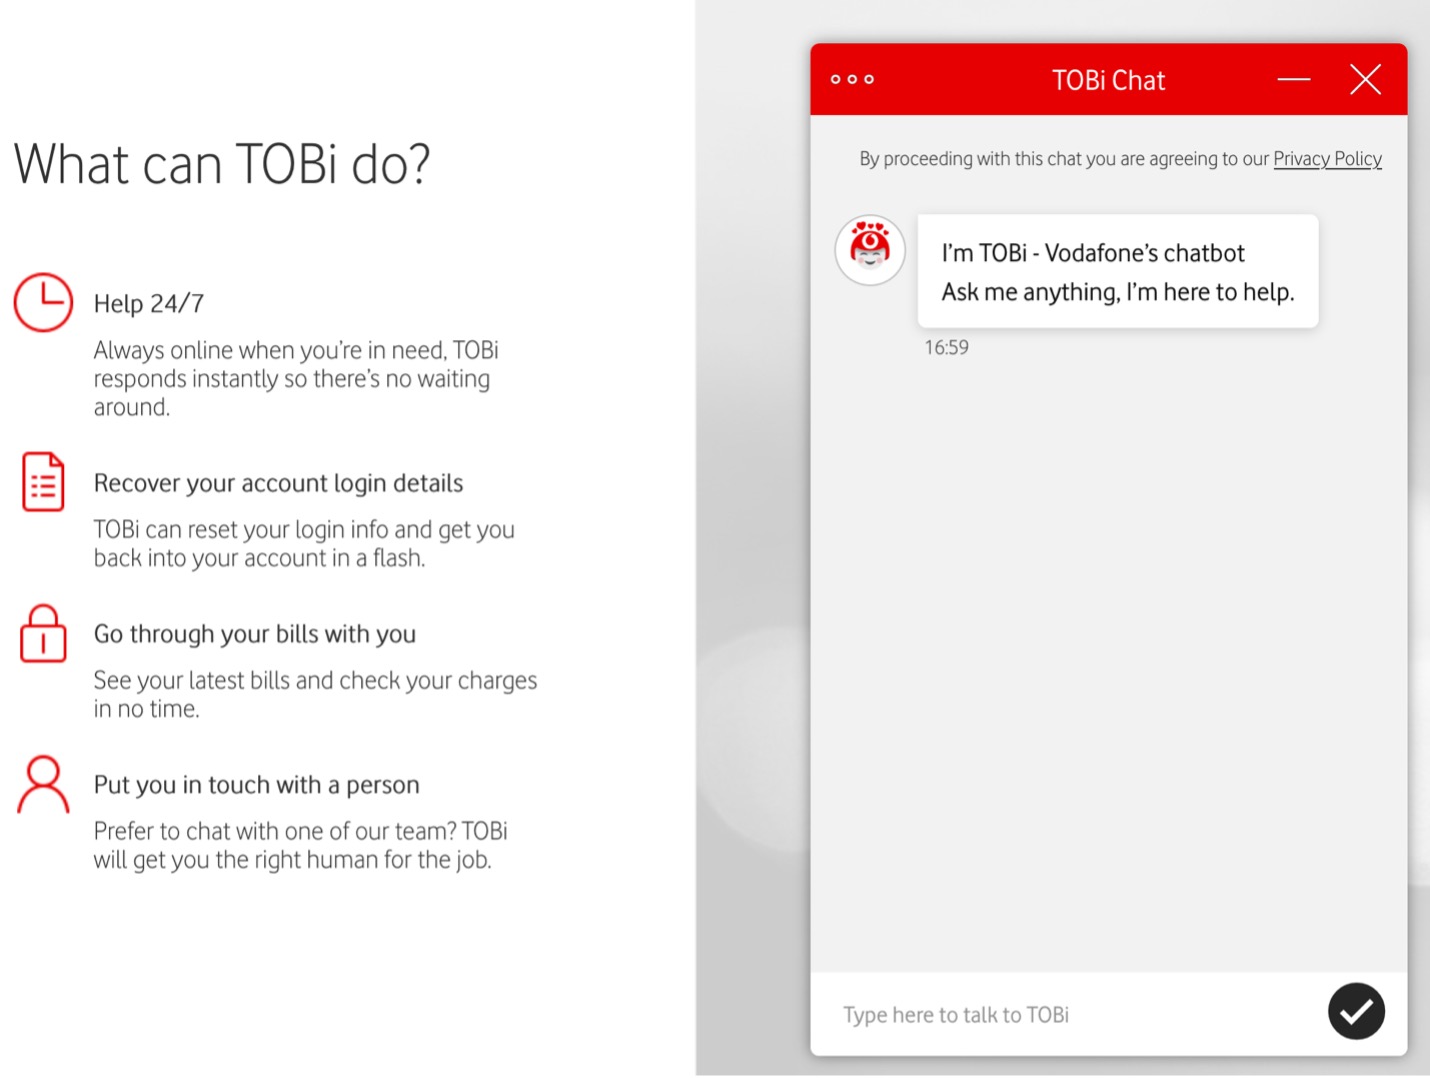 Vodafone's TOBi the digital assistant and its features including 24/7 help, help with recovering account details, go through bills and putting customers in touch with a customer service representative